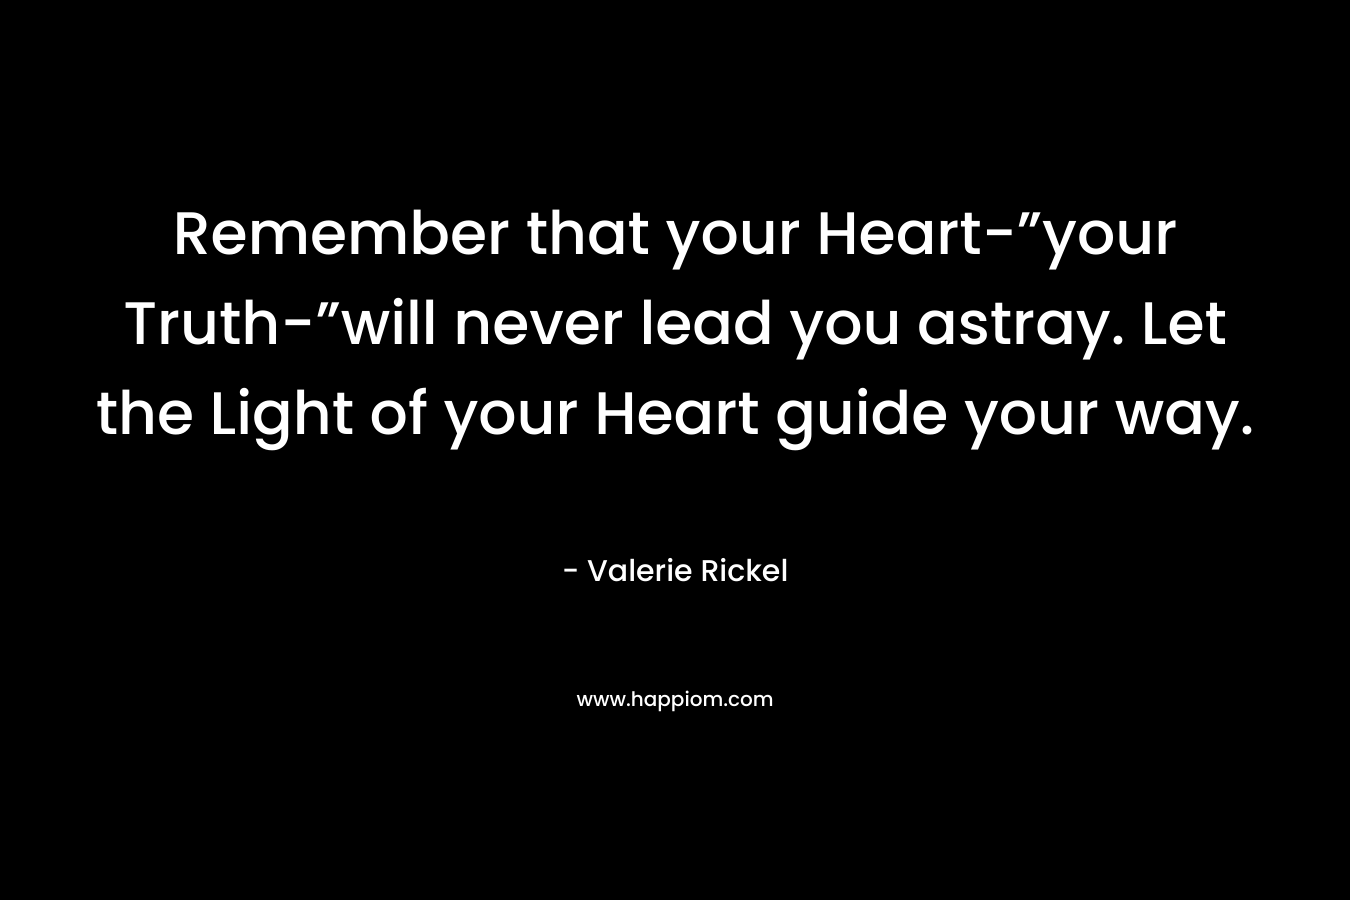 Remember that your Heart-”your Truth-”will never lead you astray. Let the Light of your Heart guide your way.